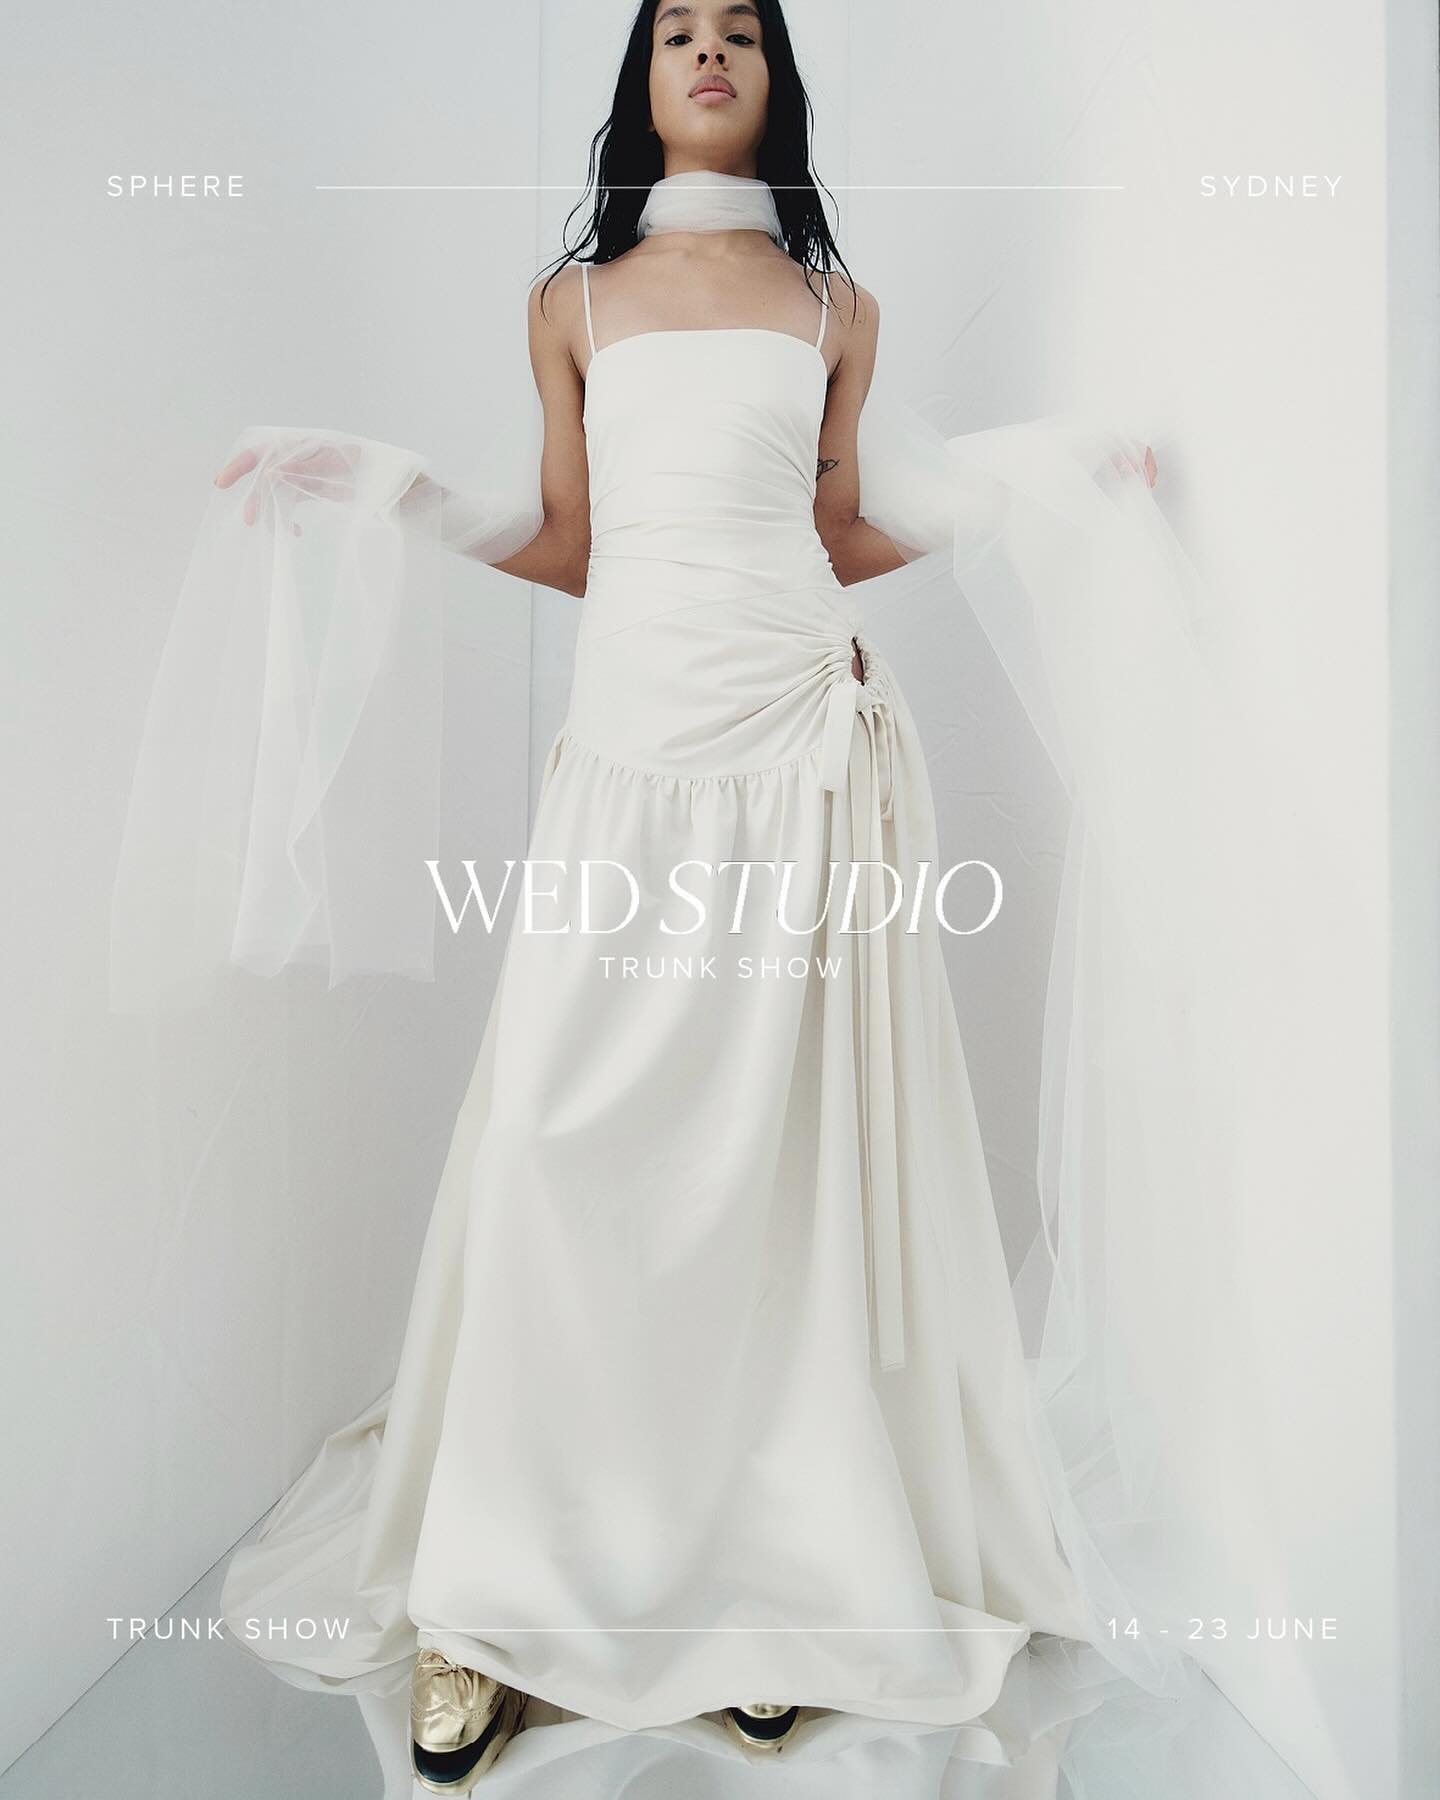 WED STUDIO TRUNK SHOW &mdash;&mdash; Making their Australian debut, we&rsquo;re so excited to showcase London designer and fashion favourite @wedstudio_  at Sphere Bridal Gallery next month!

Renowned for their chic, unconventional design approach th